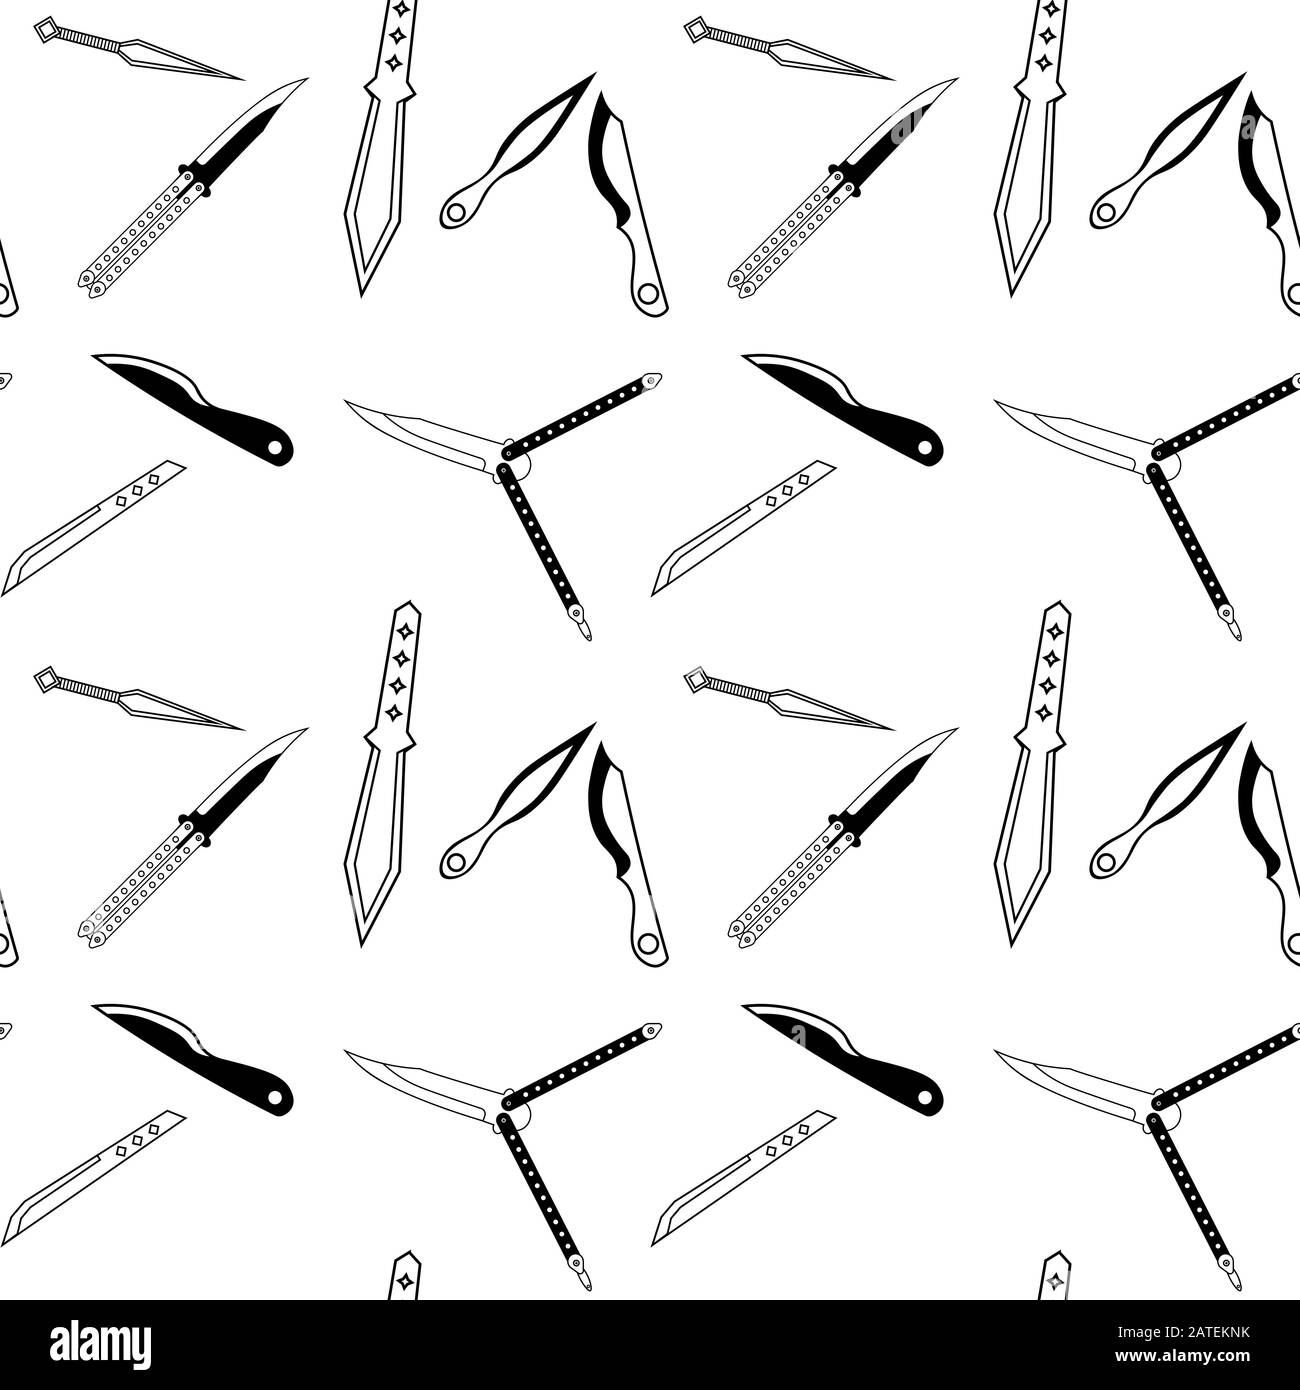 Seamless background with black and white throwing knives and butterfly knives Stock Vector